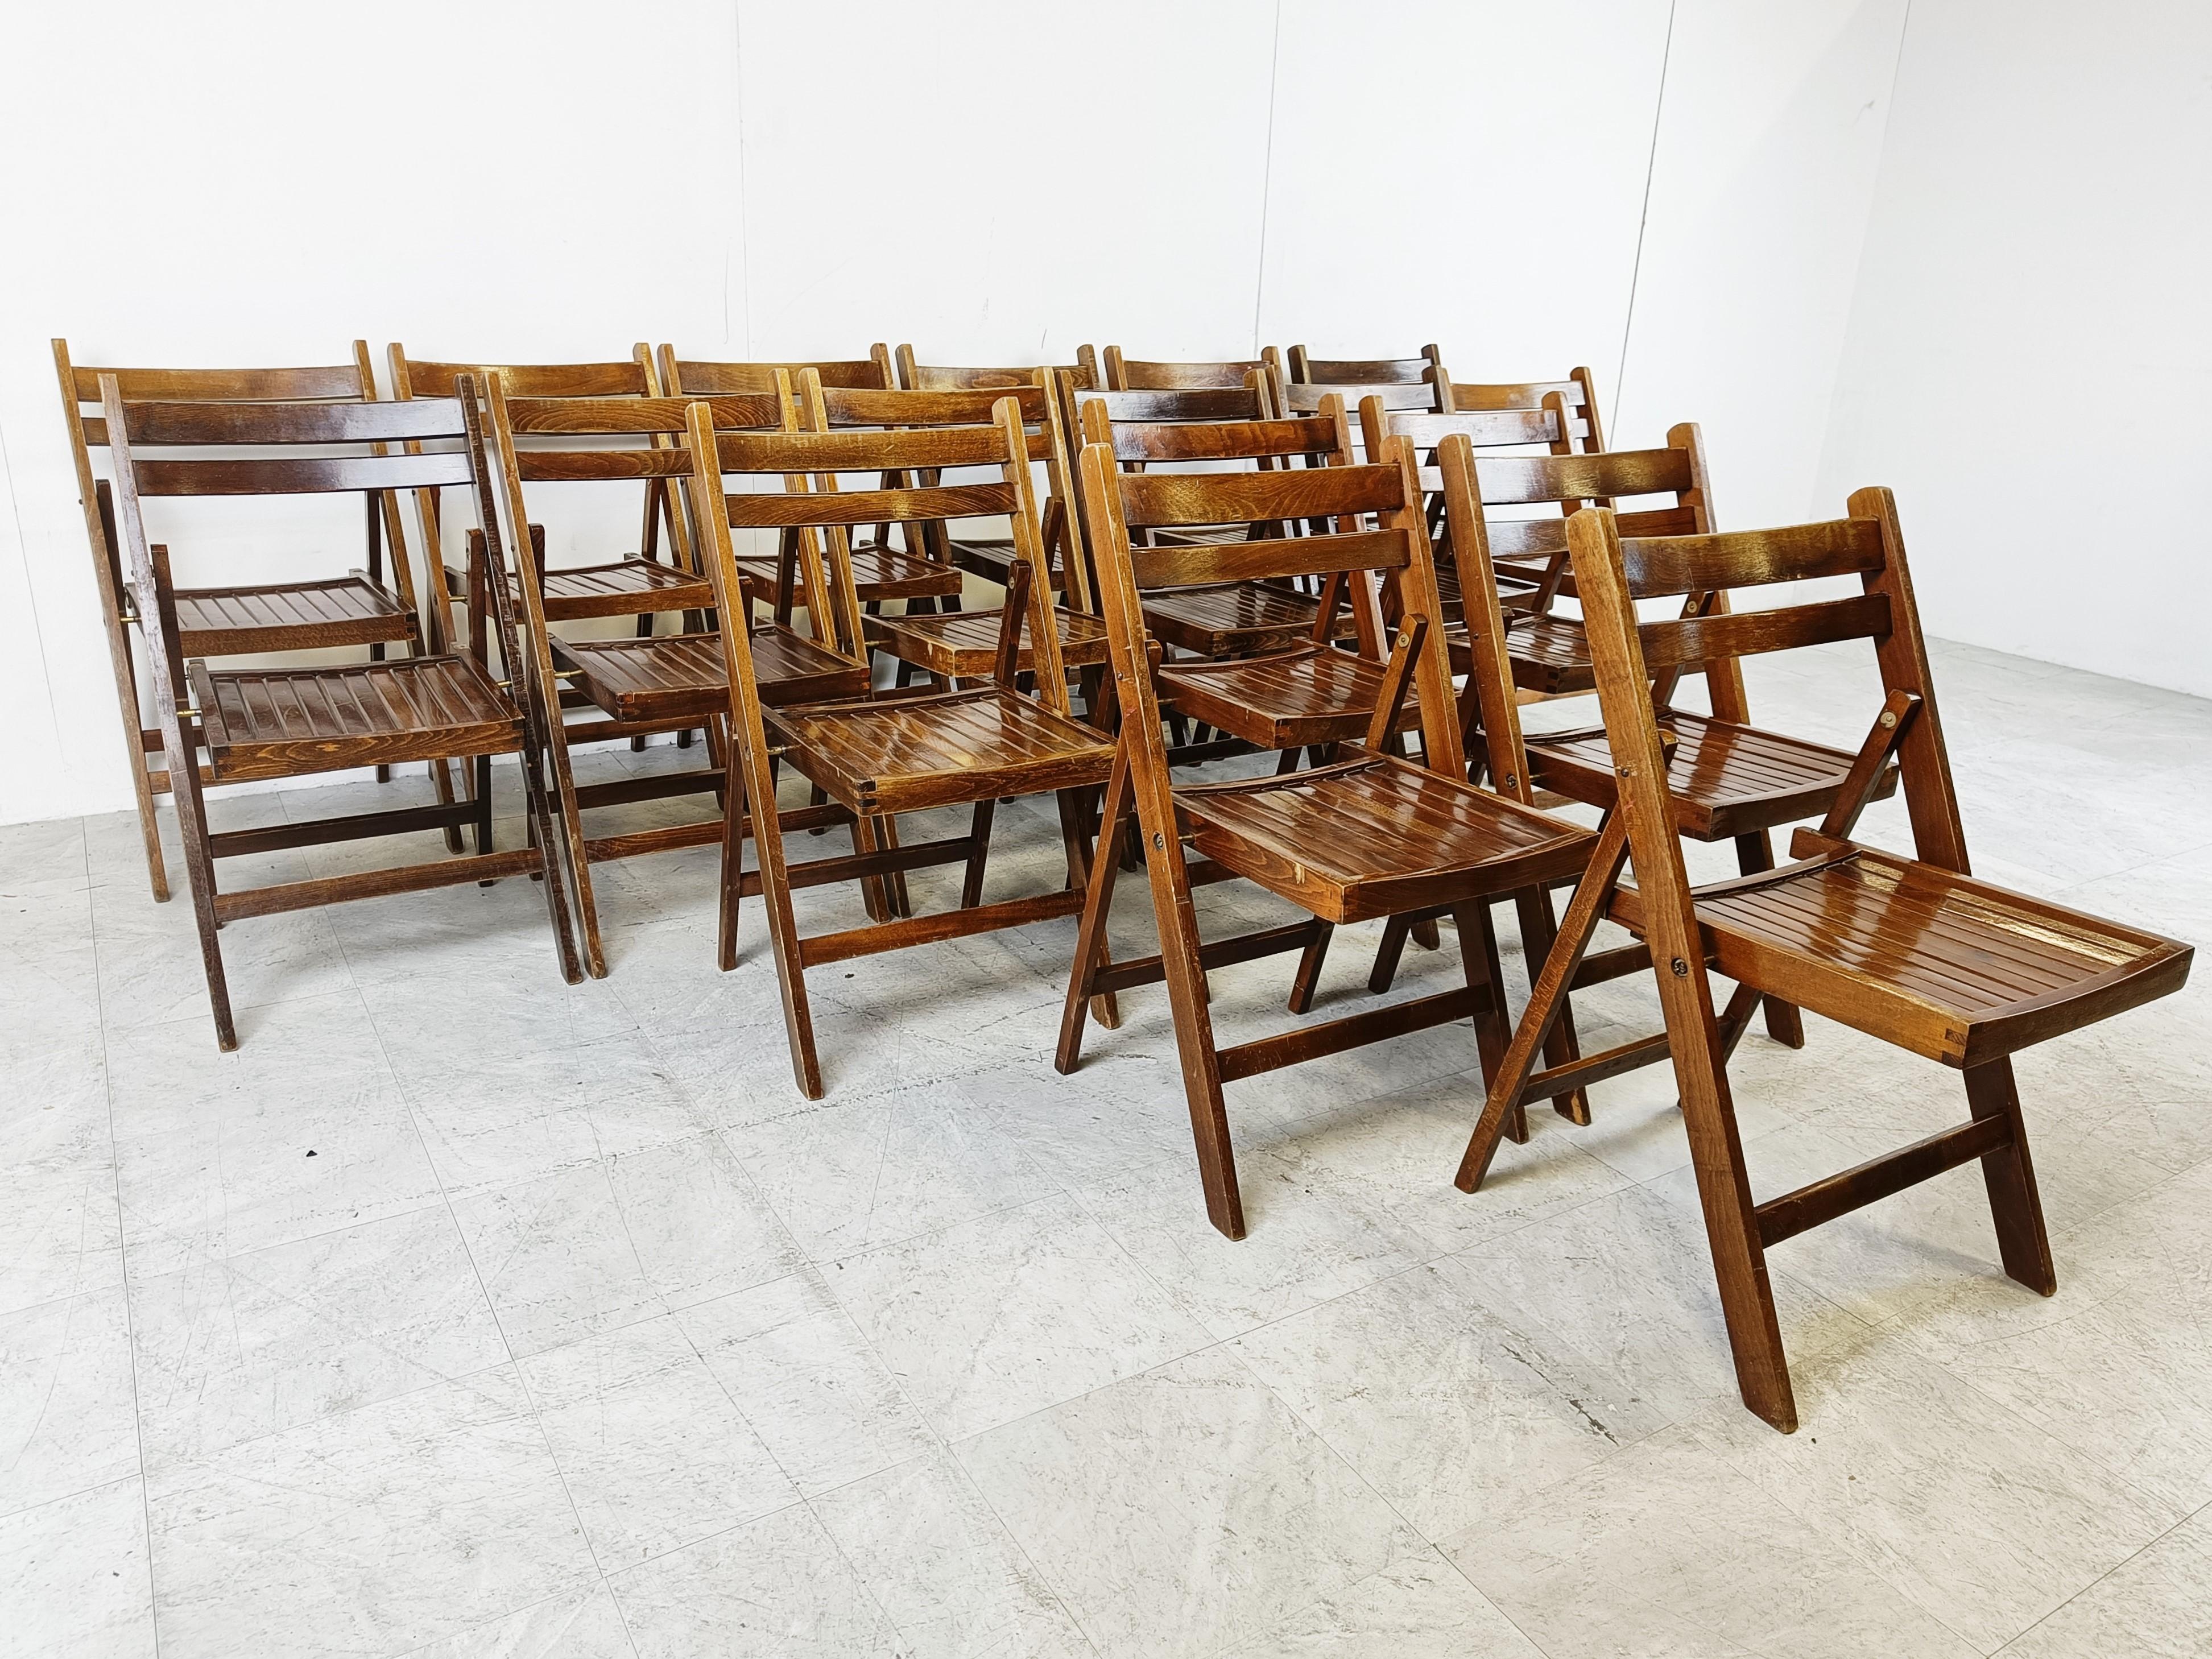 Romanian Midcentury Wooden Folding Chairs, 1950s  For Sale